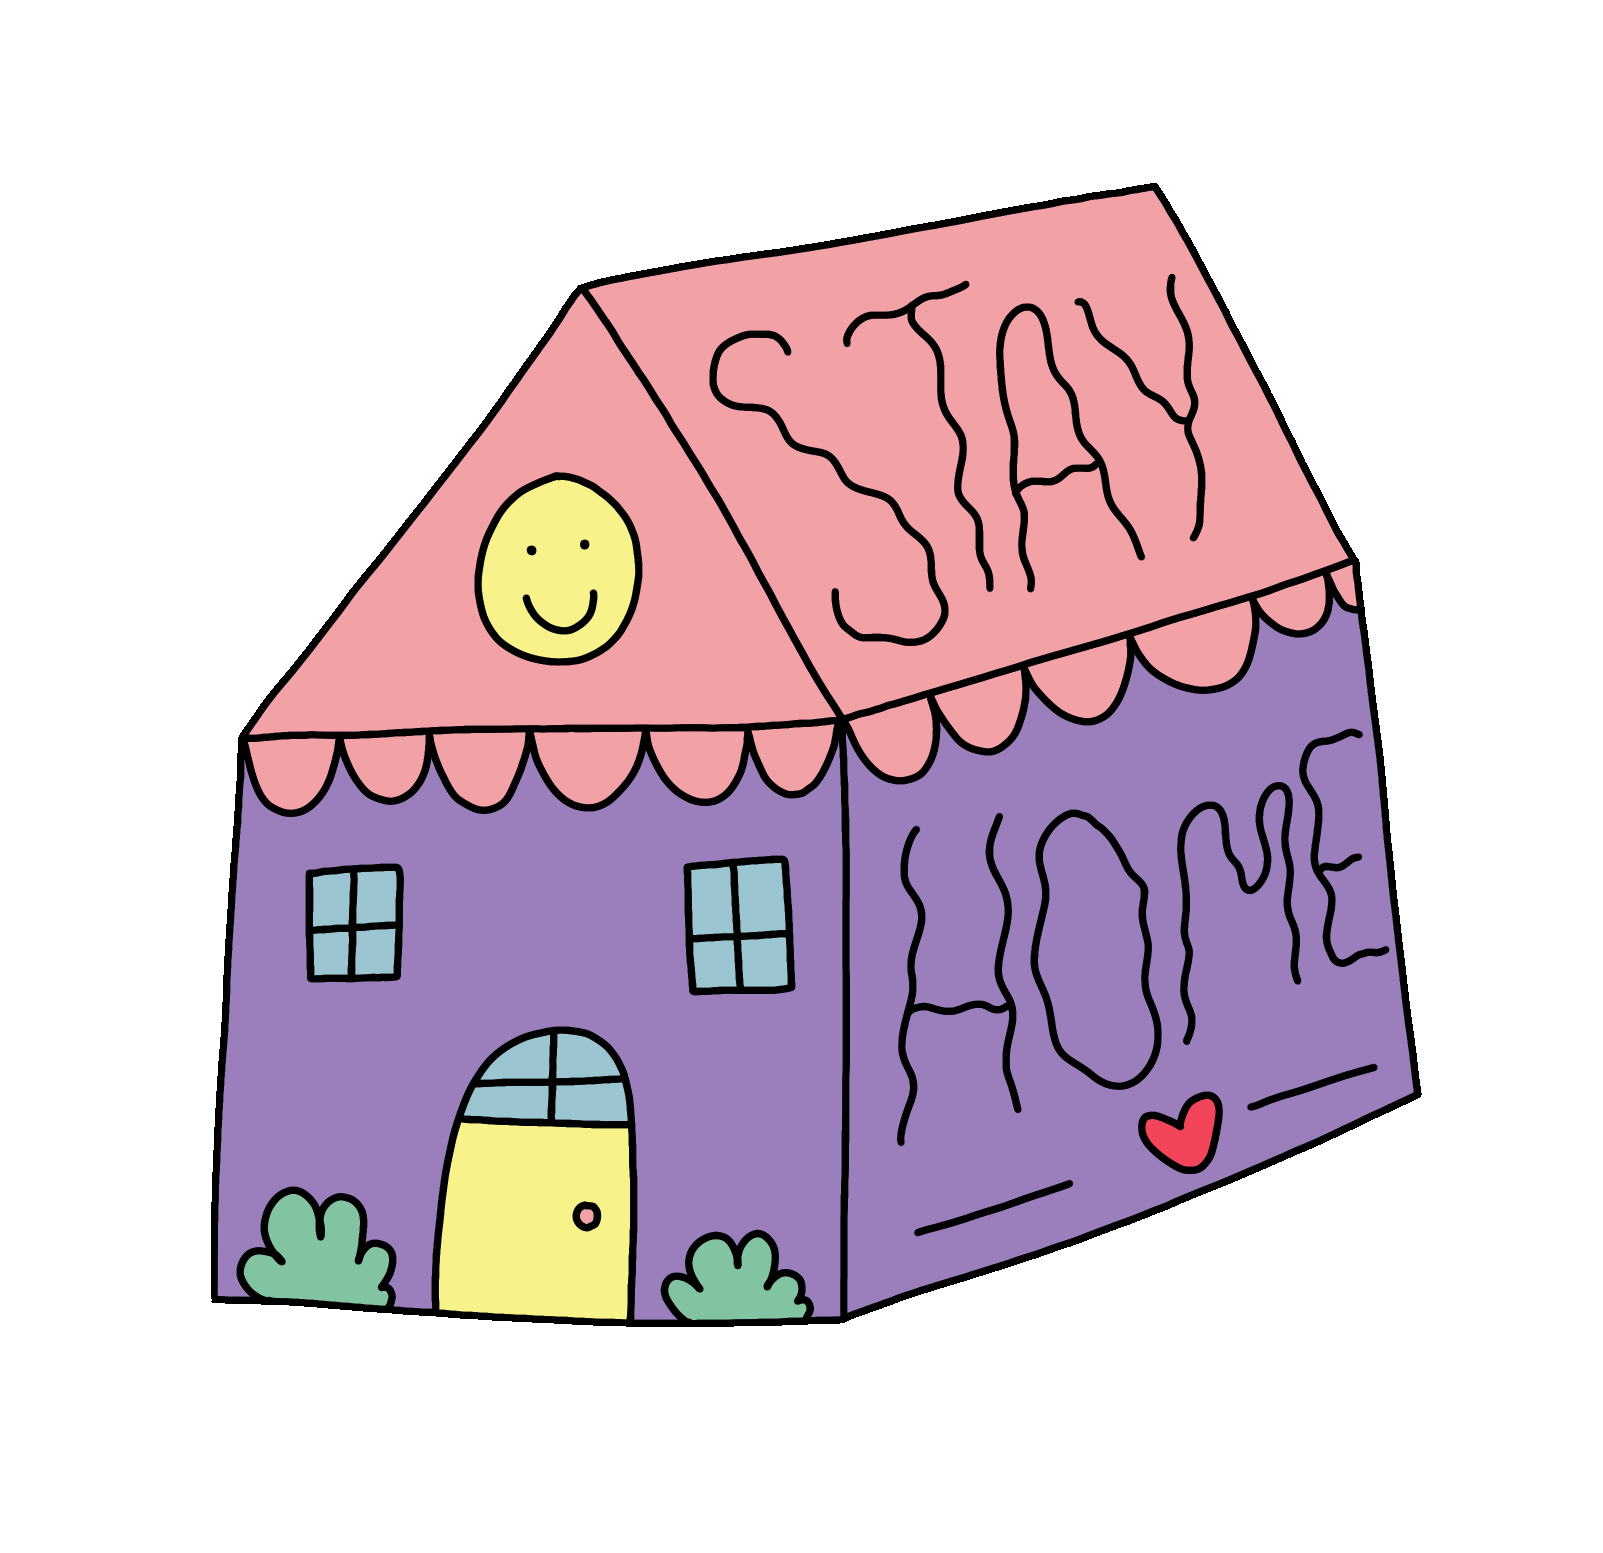 Stay Home Sticker by velcro for iOS & Android | GIPHY